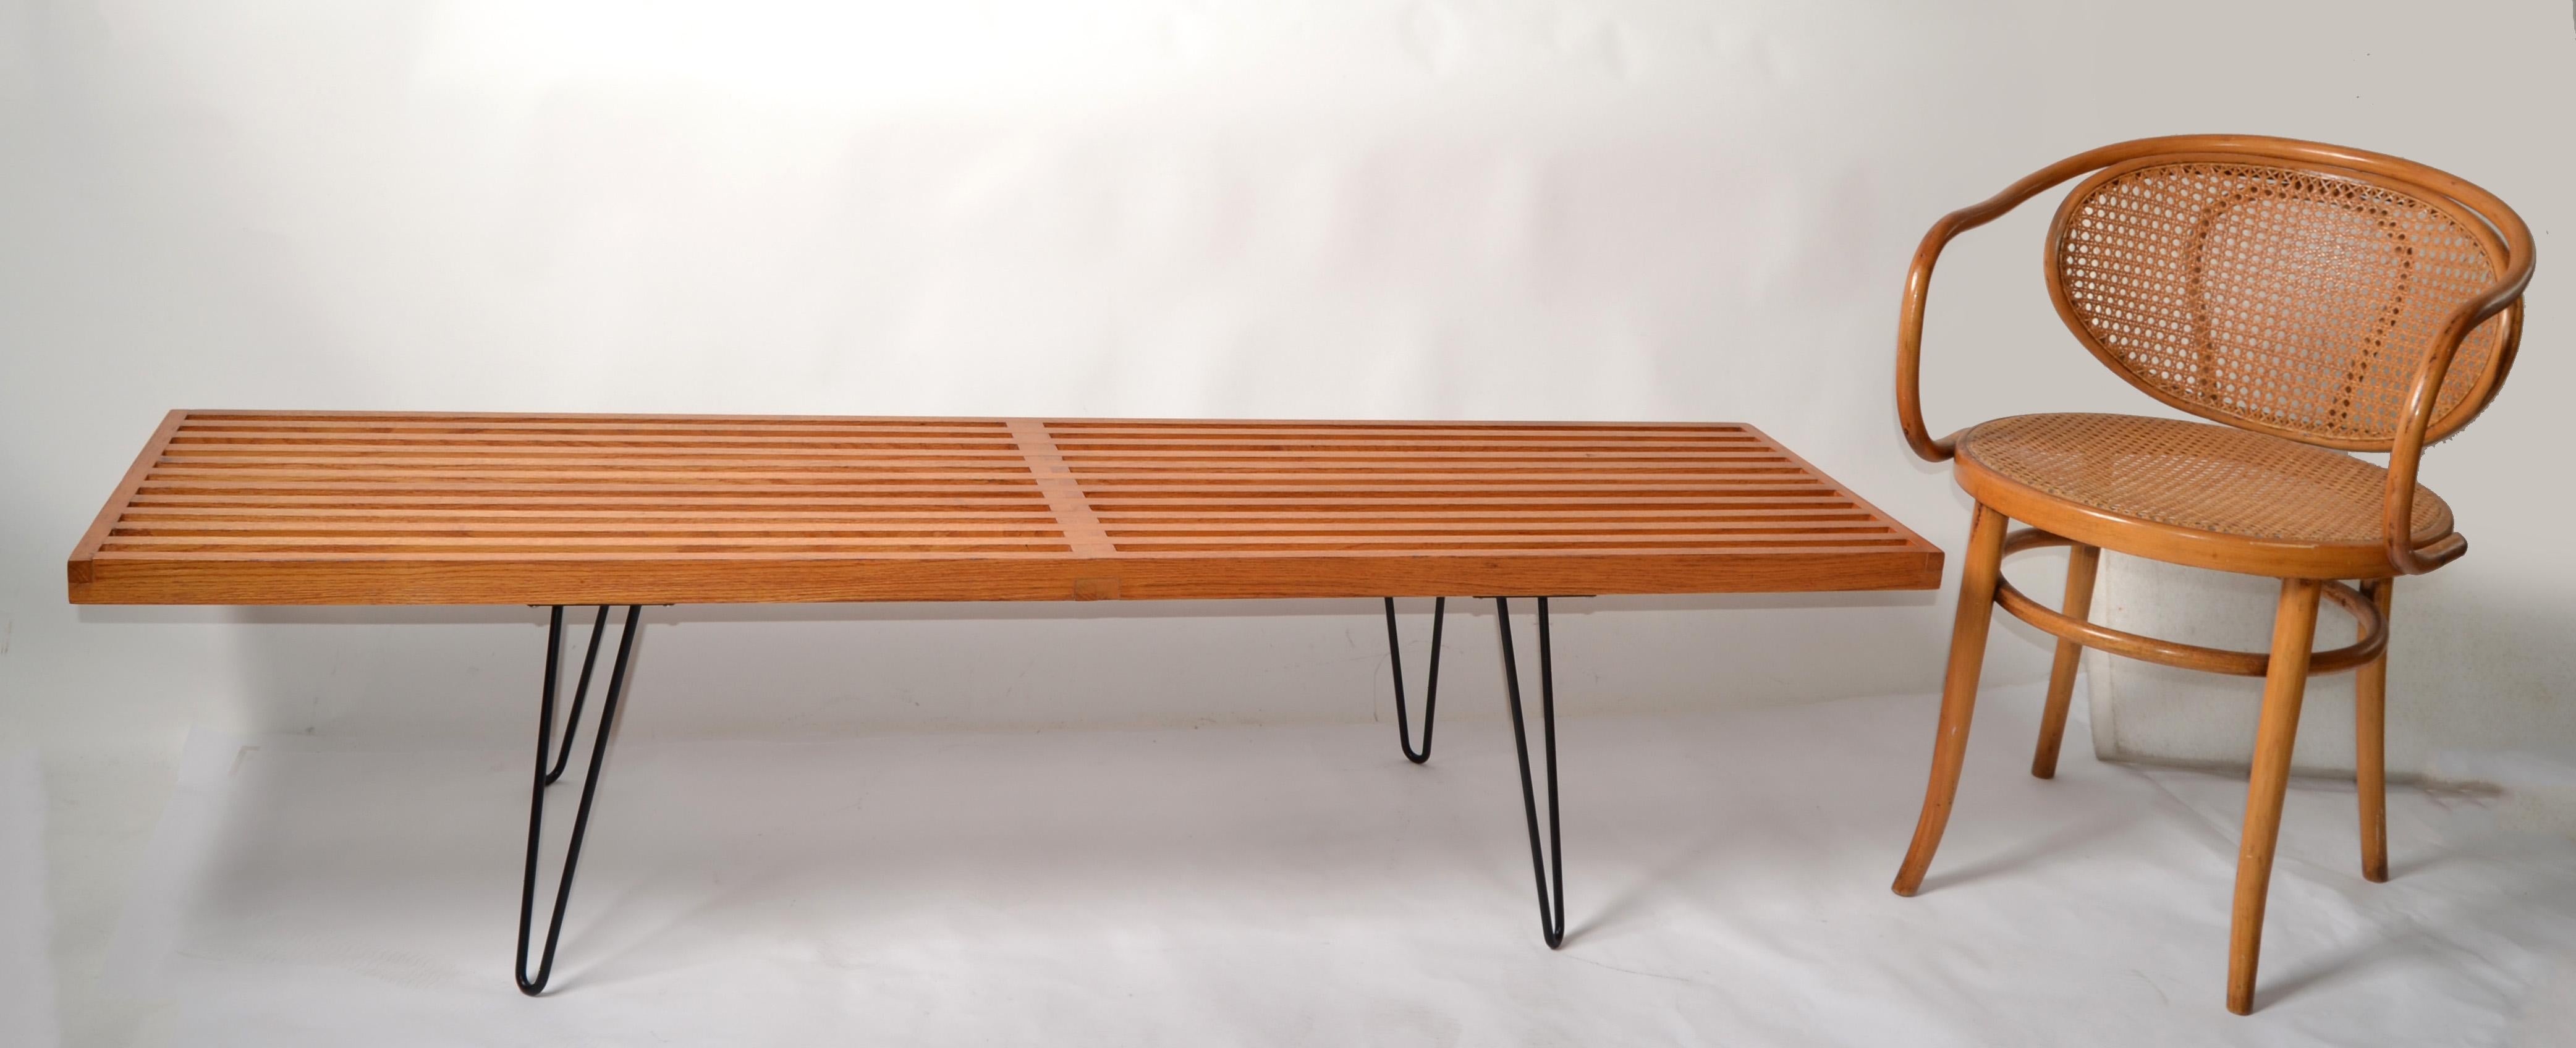 George Nelson Style Oak Slat Bench With Steel Hairpin Legs Attributed to Knoll For Sale 7